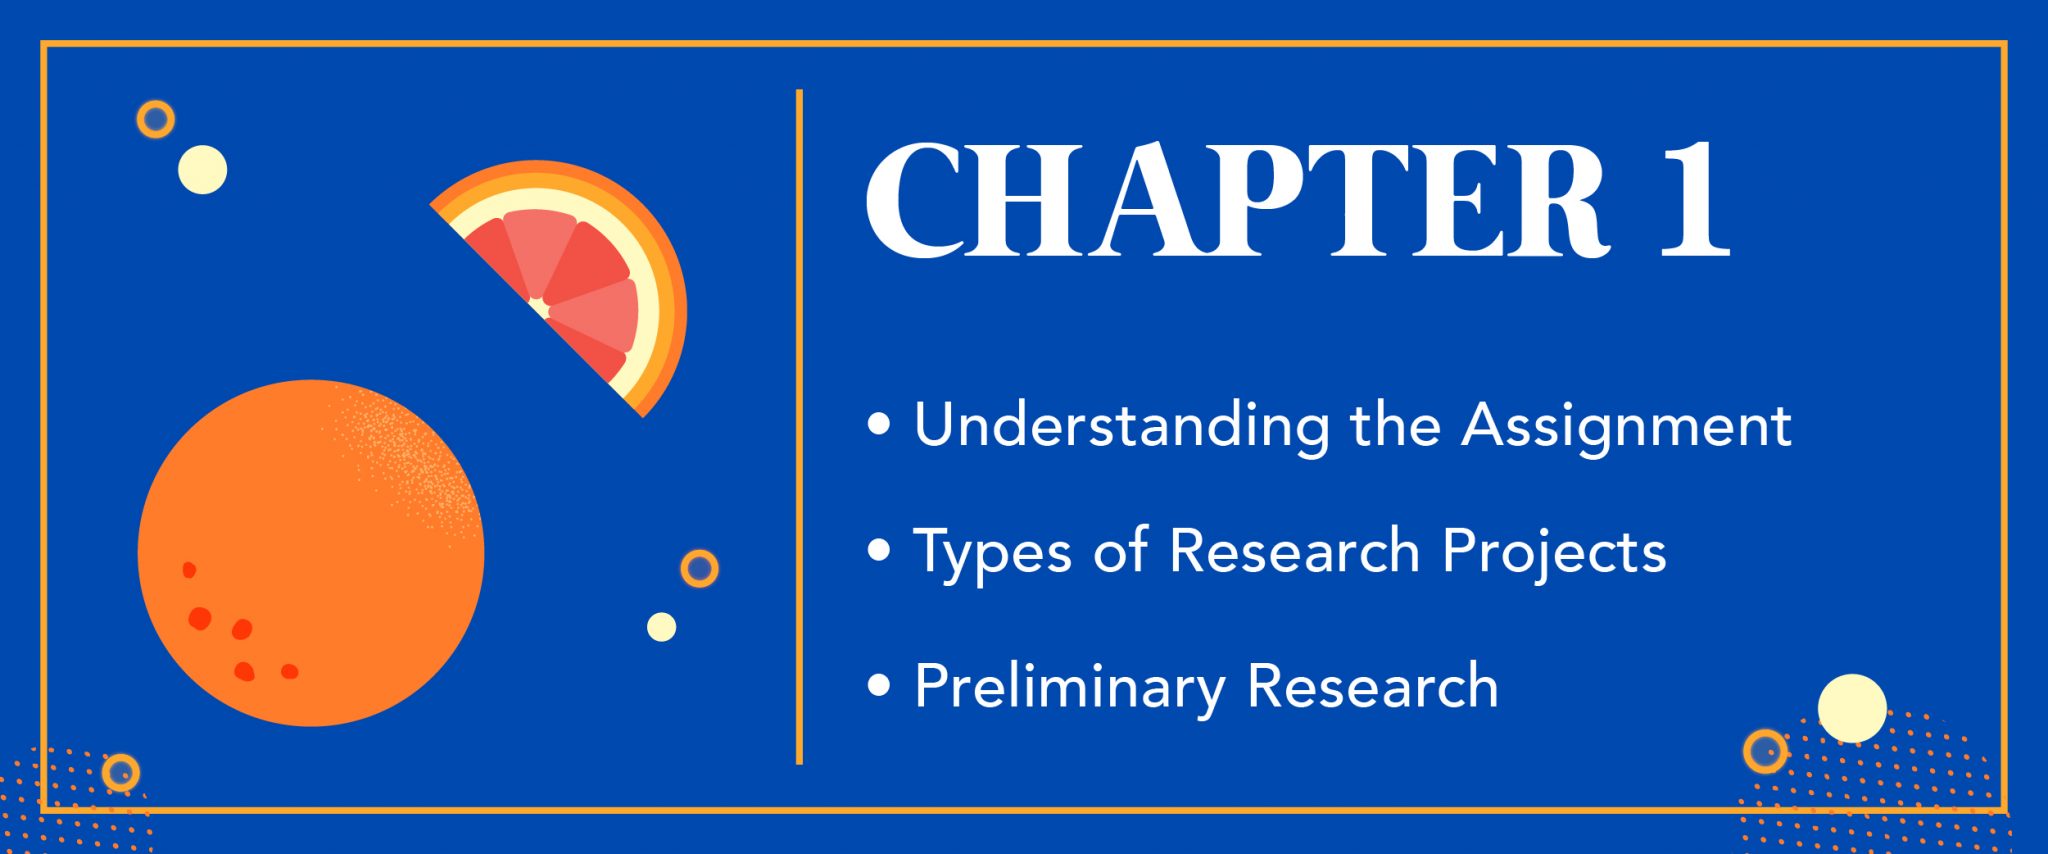 research objectives chapter 1